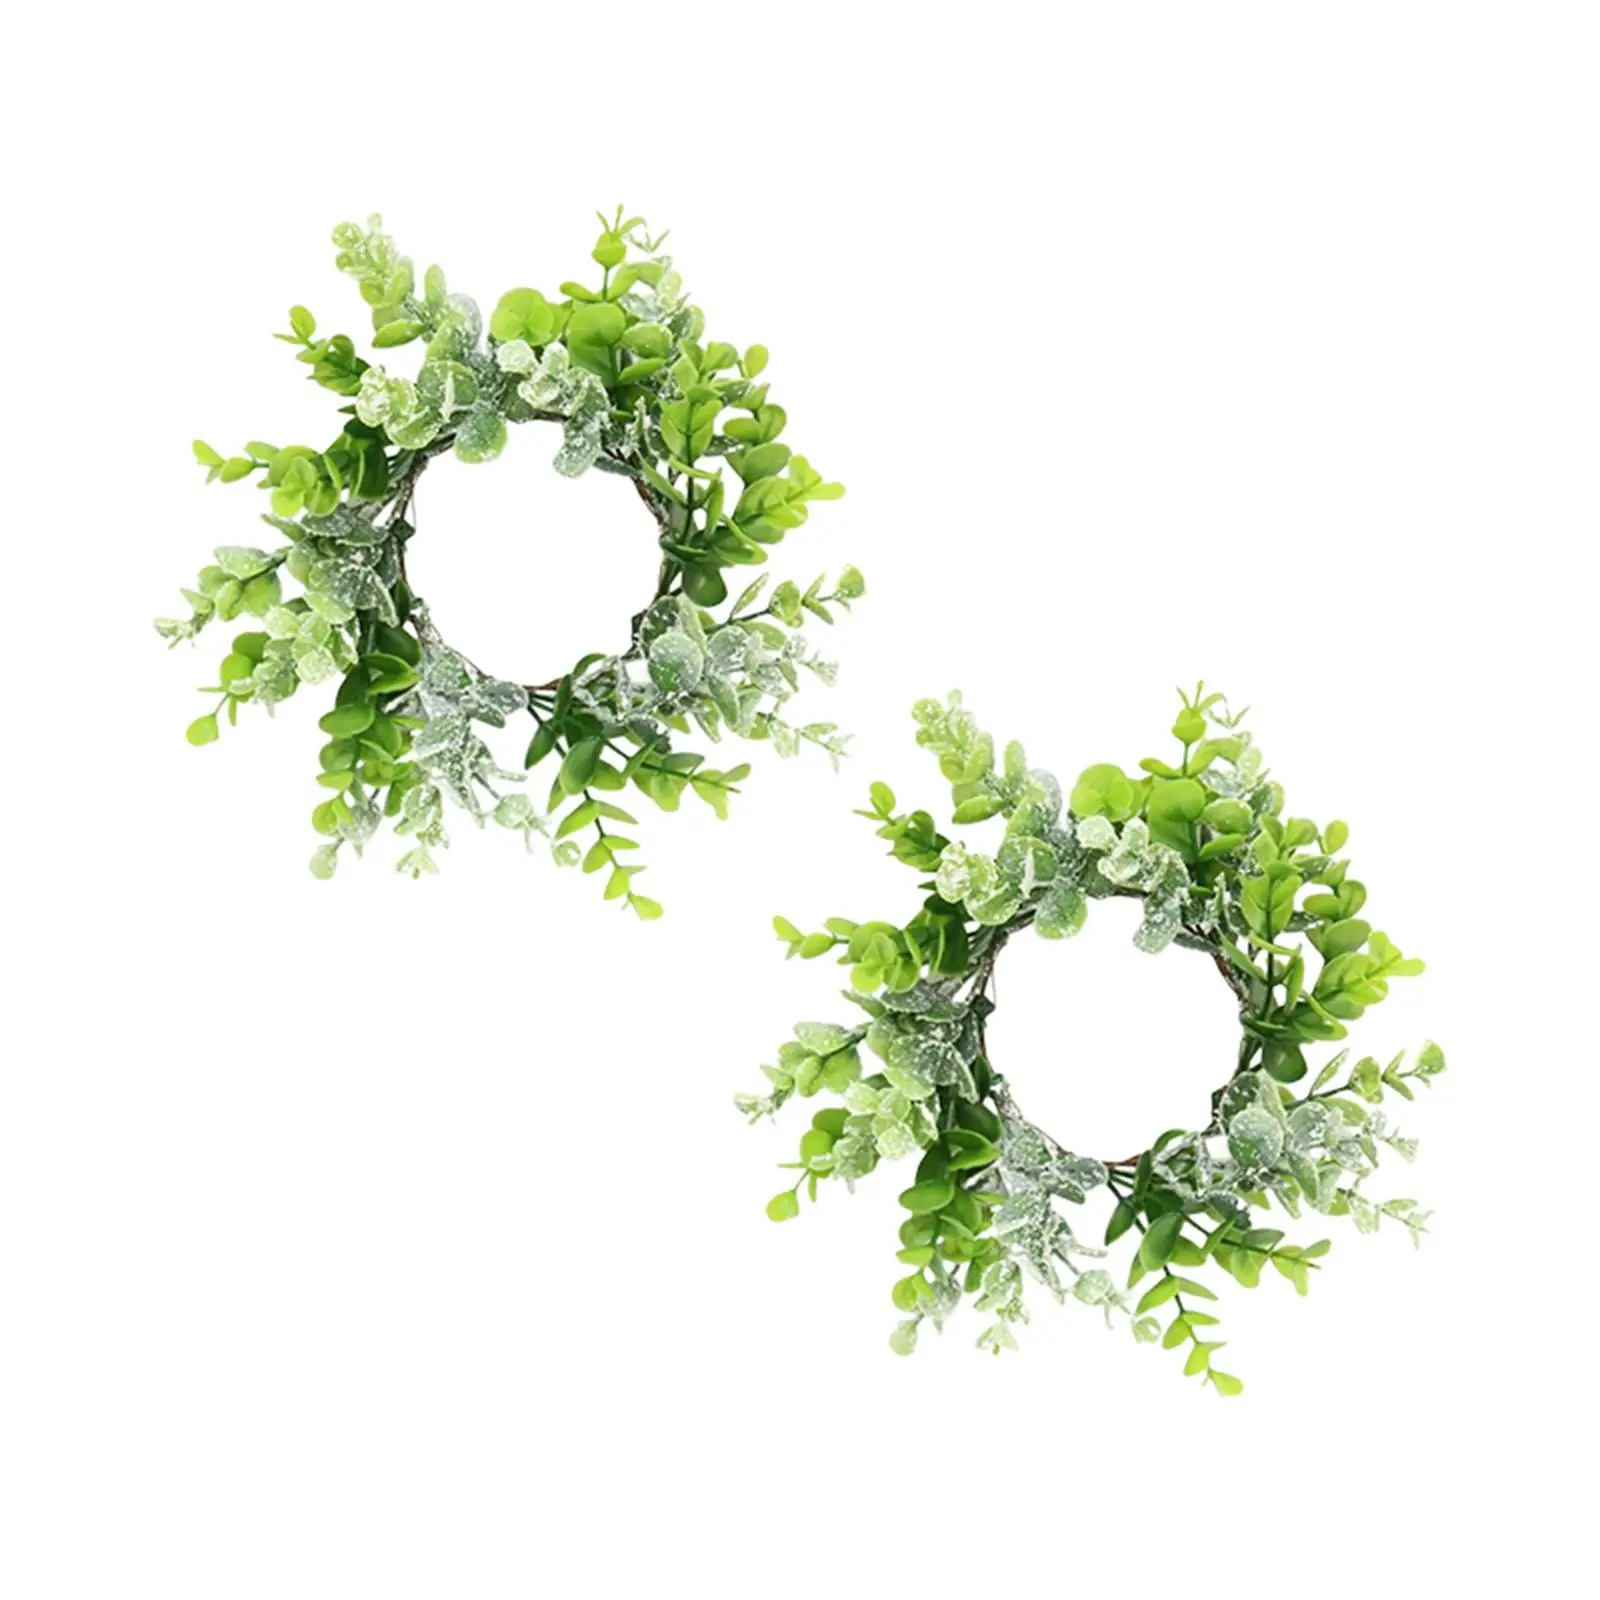 2x Artificial Garland Door Hanging Beautiful Floral Hoop Green Leaves Wreath for Farmhouse Porch Garden Home Window